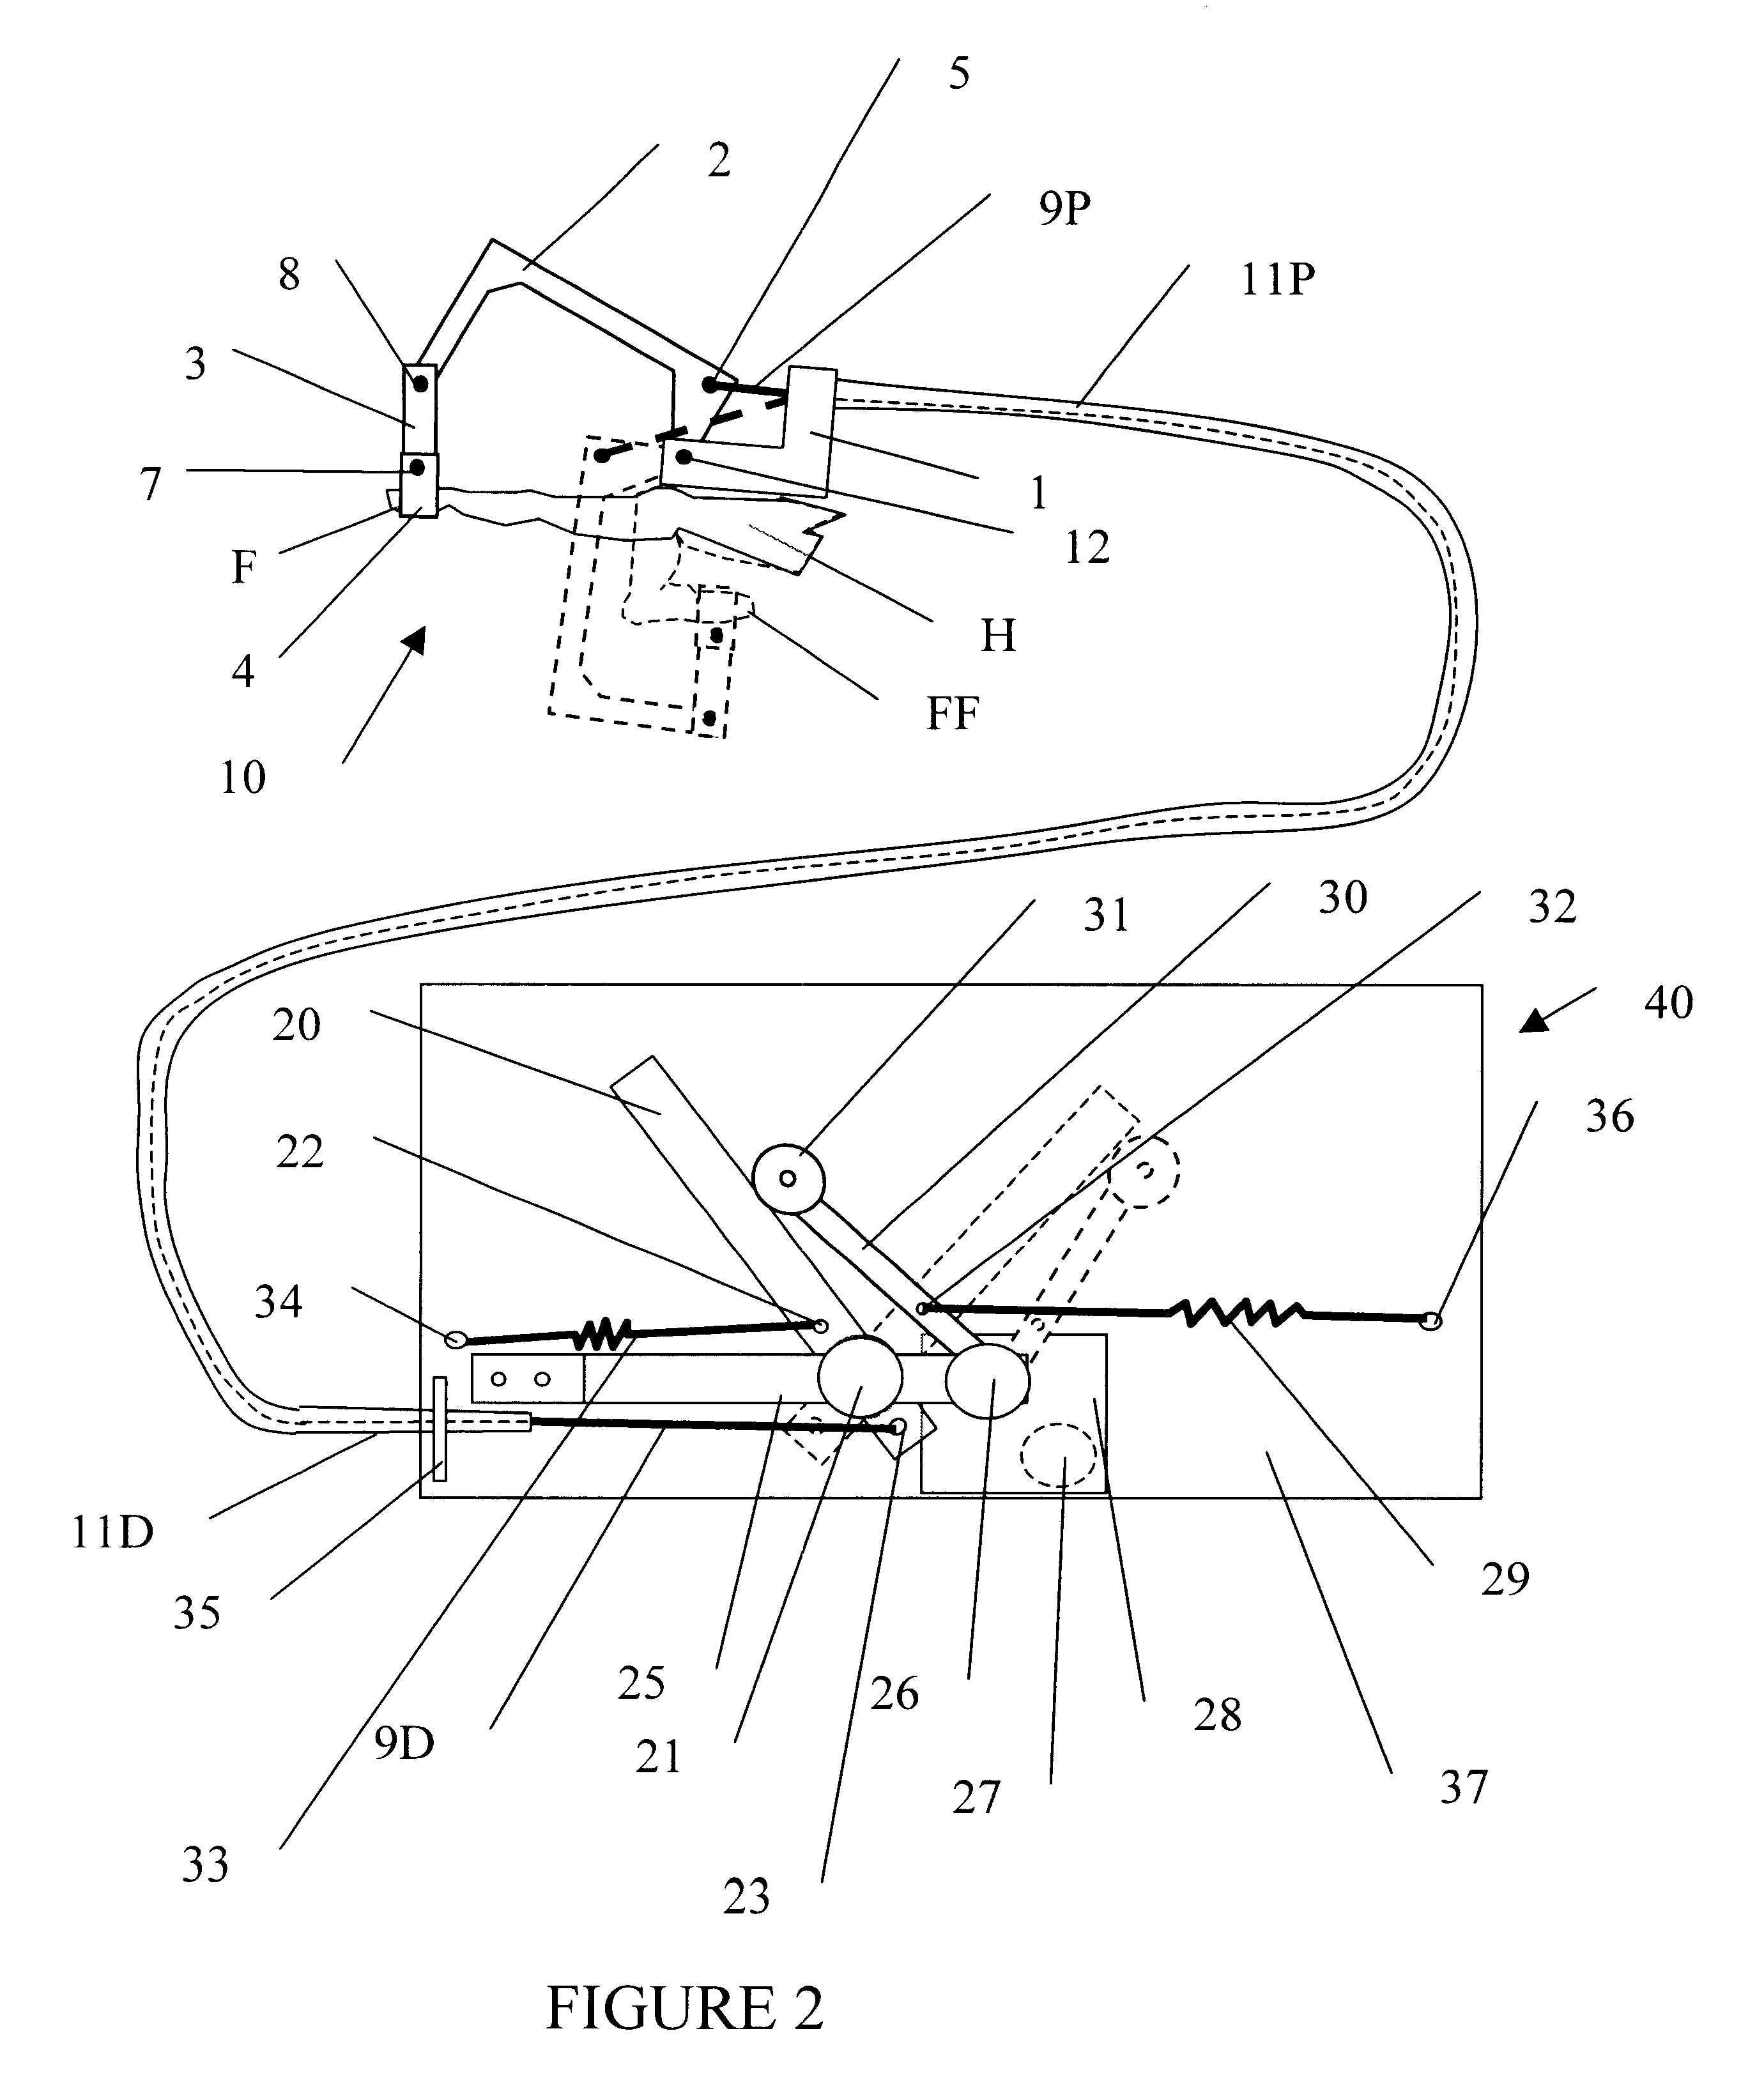 Force display master interface device for teleoperation